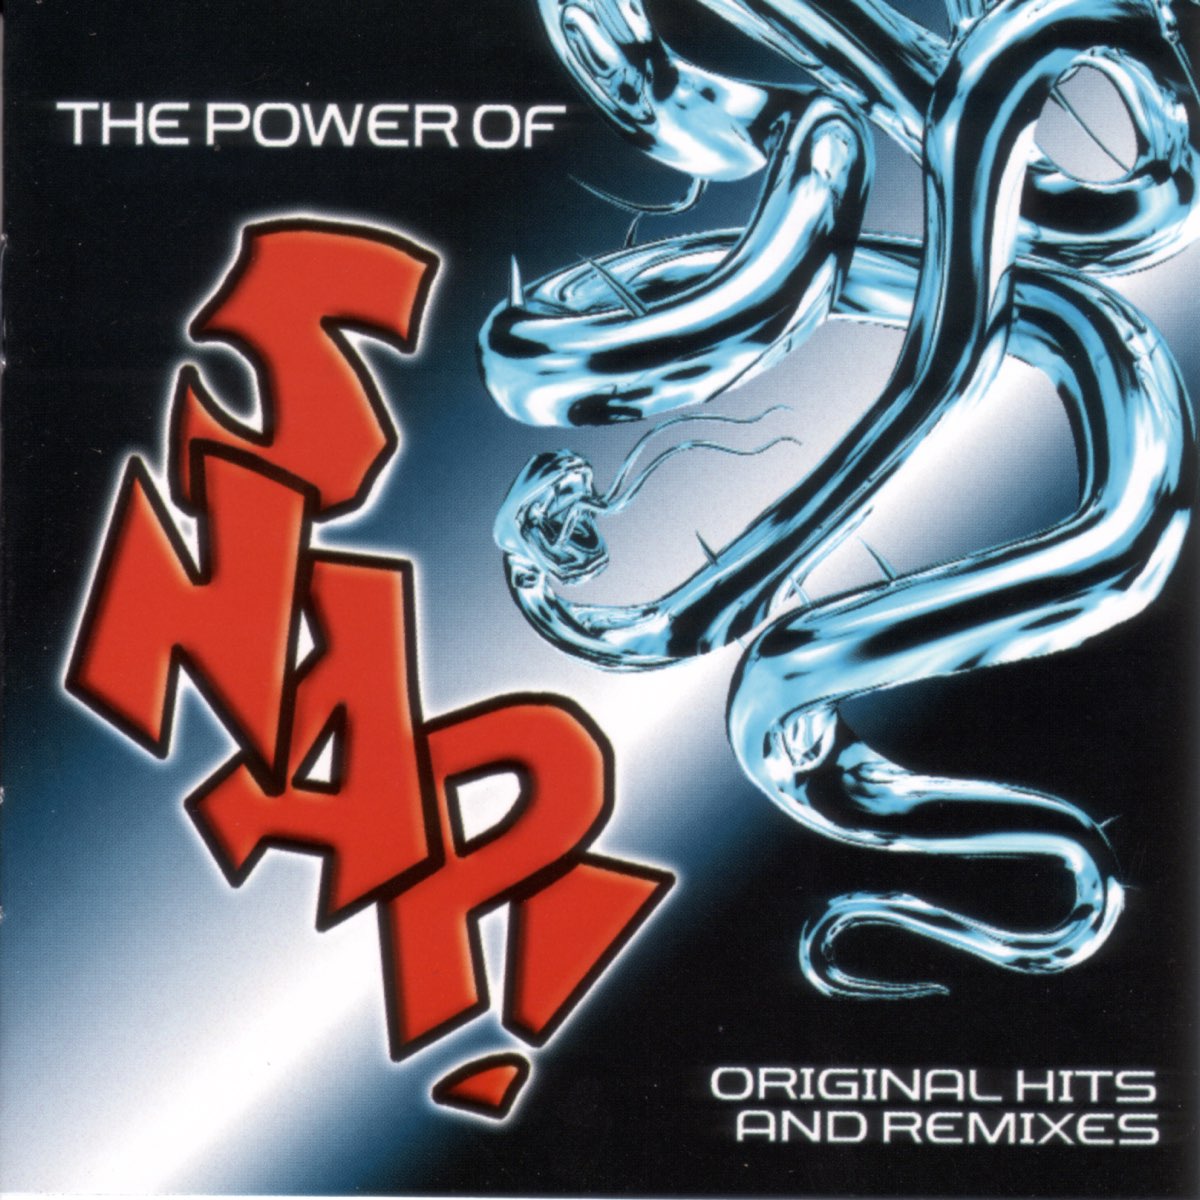 The Power of Snap! Original Hits and Remixes by Snap! on Apple Music